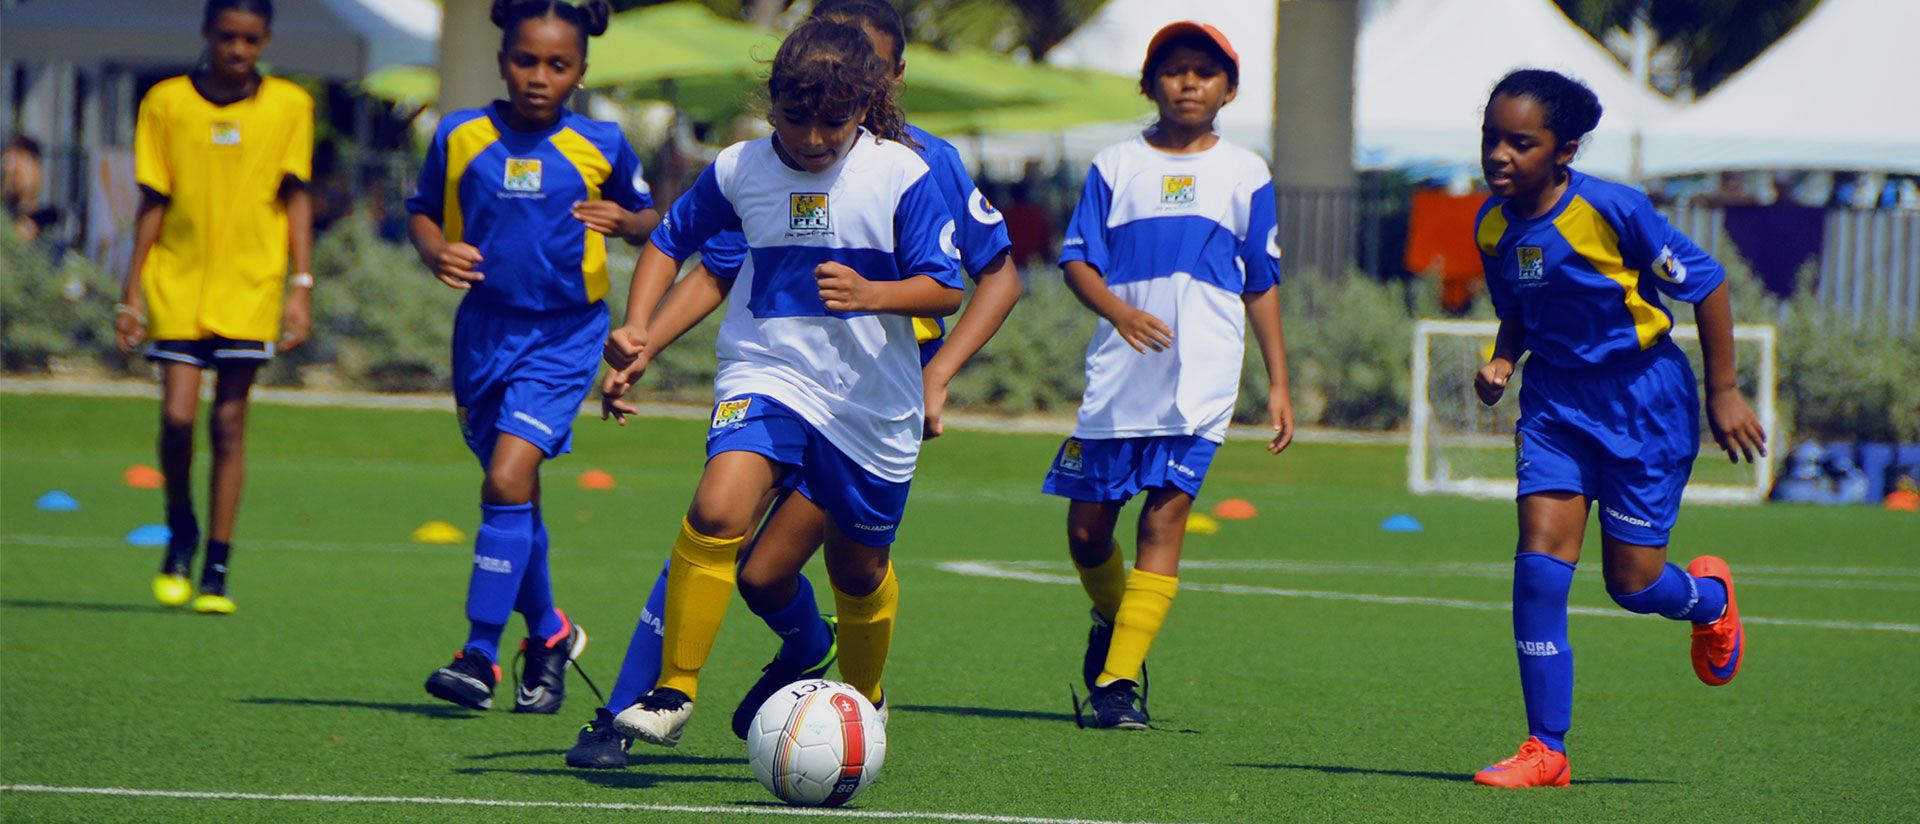 Girl's Primary Football League kicks off this weekend